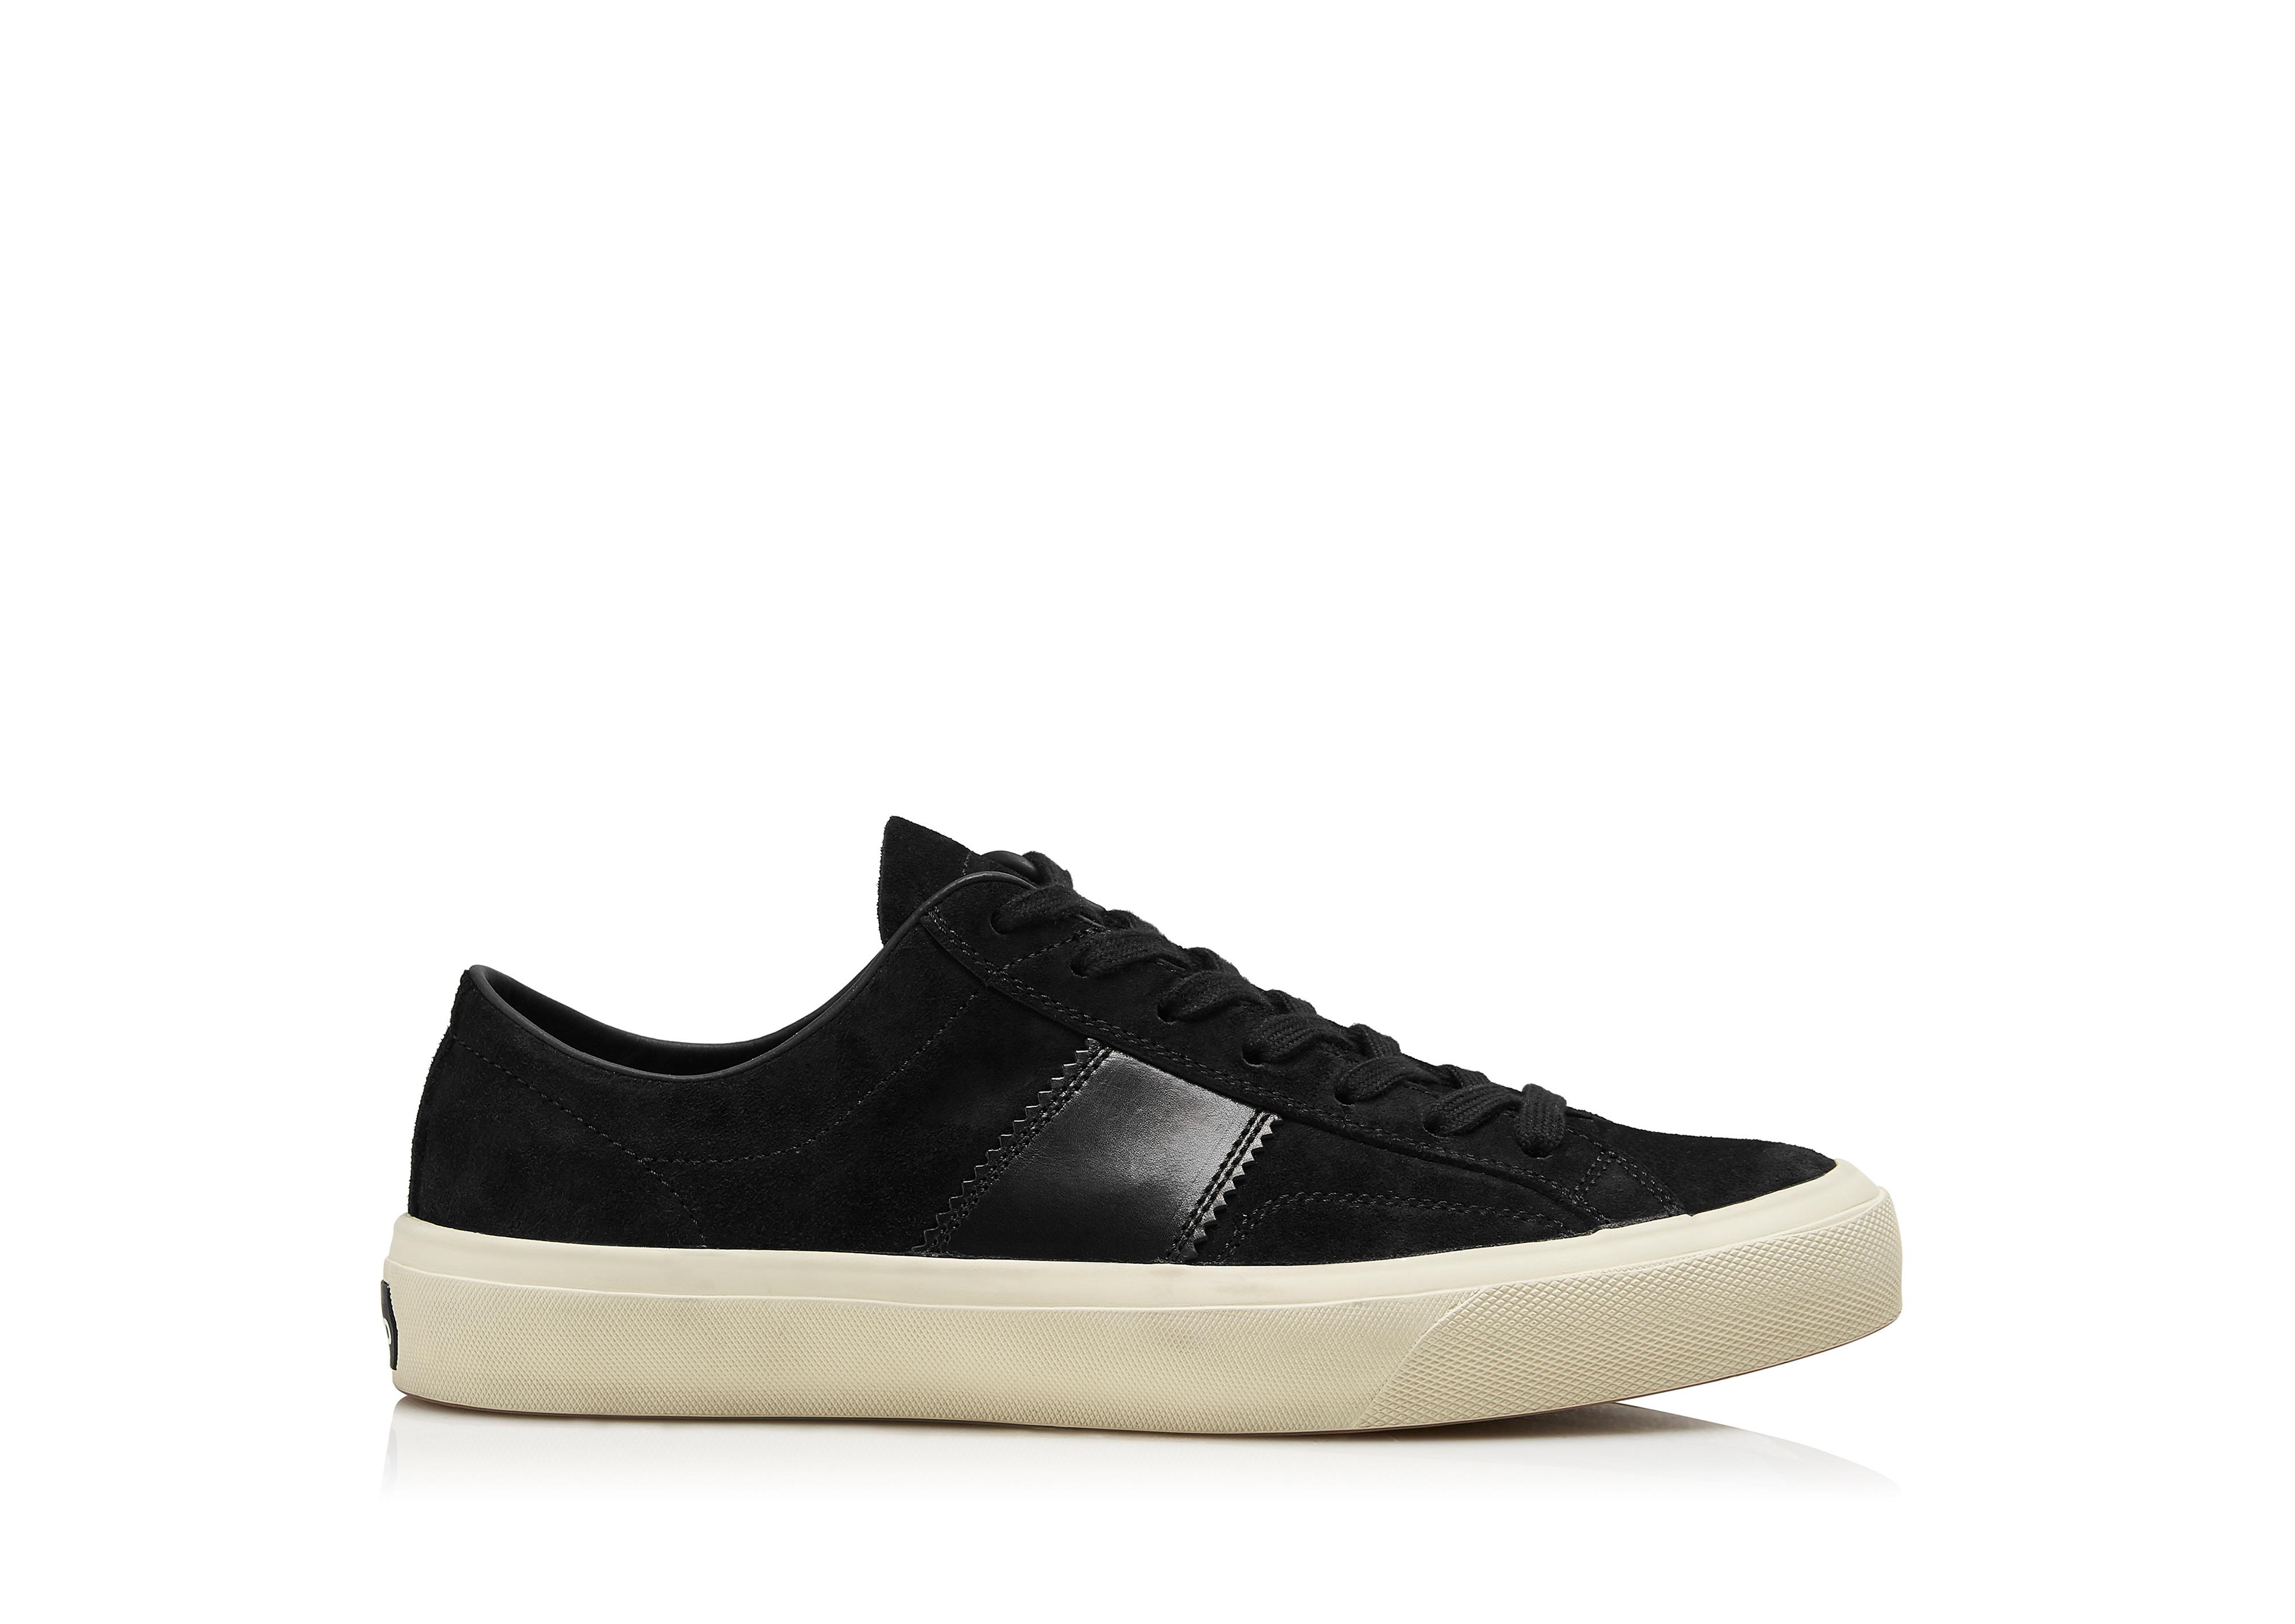 Tom Ford CAMBRIDGE LACE UP SNEAKER | TomFord.com